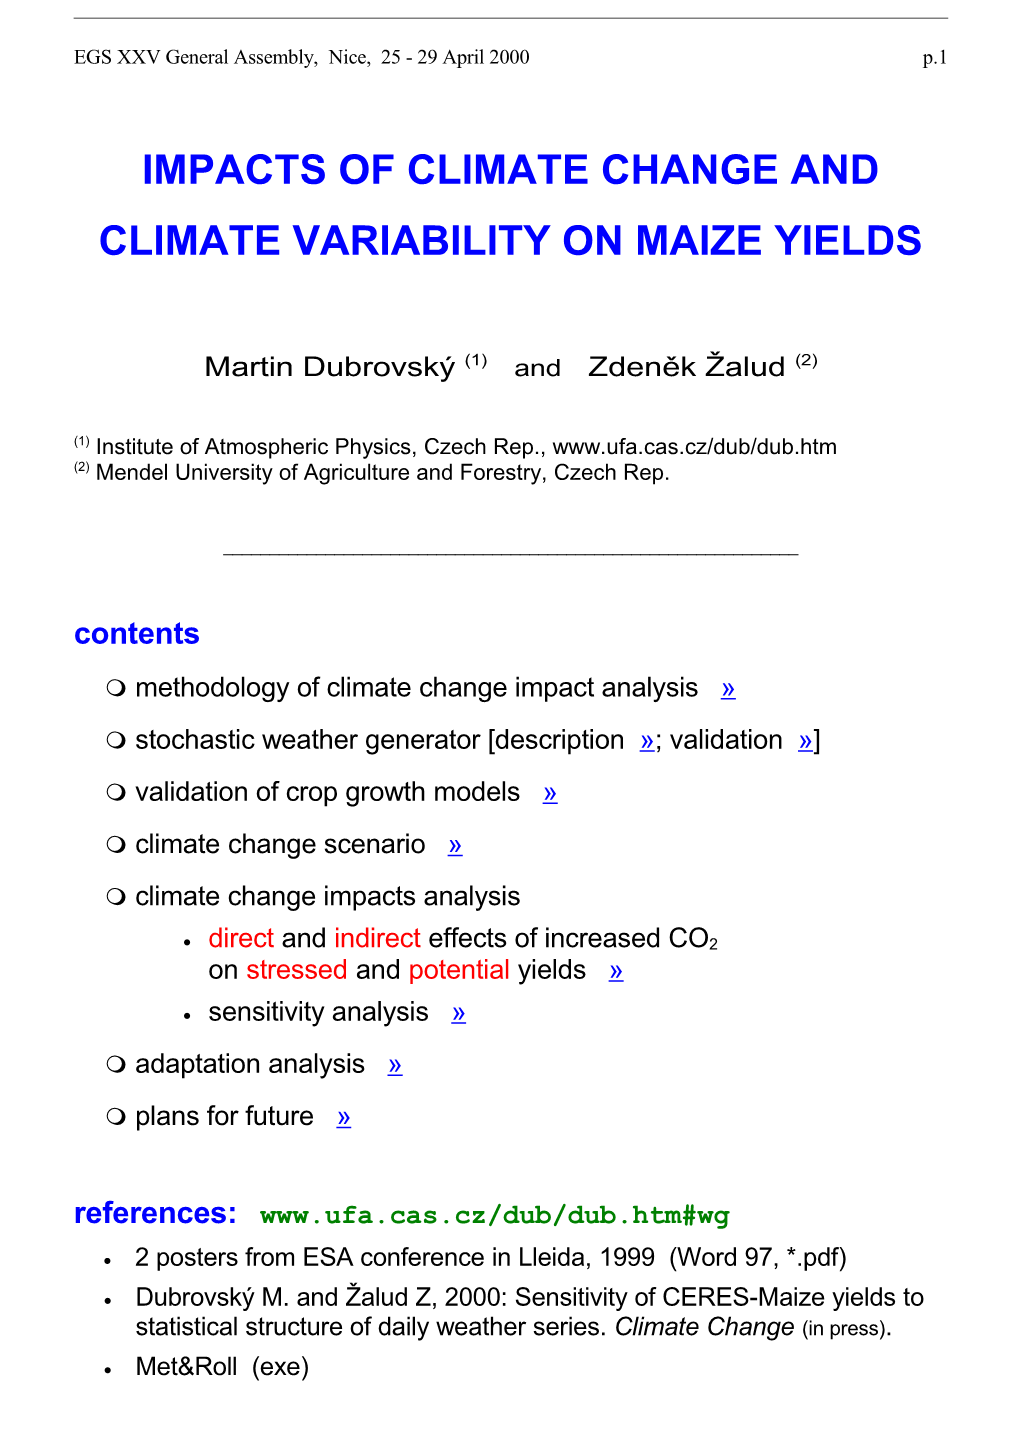 Impacts of Climate Change and Climate Variability on Maize Yields